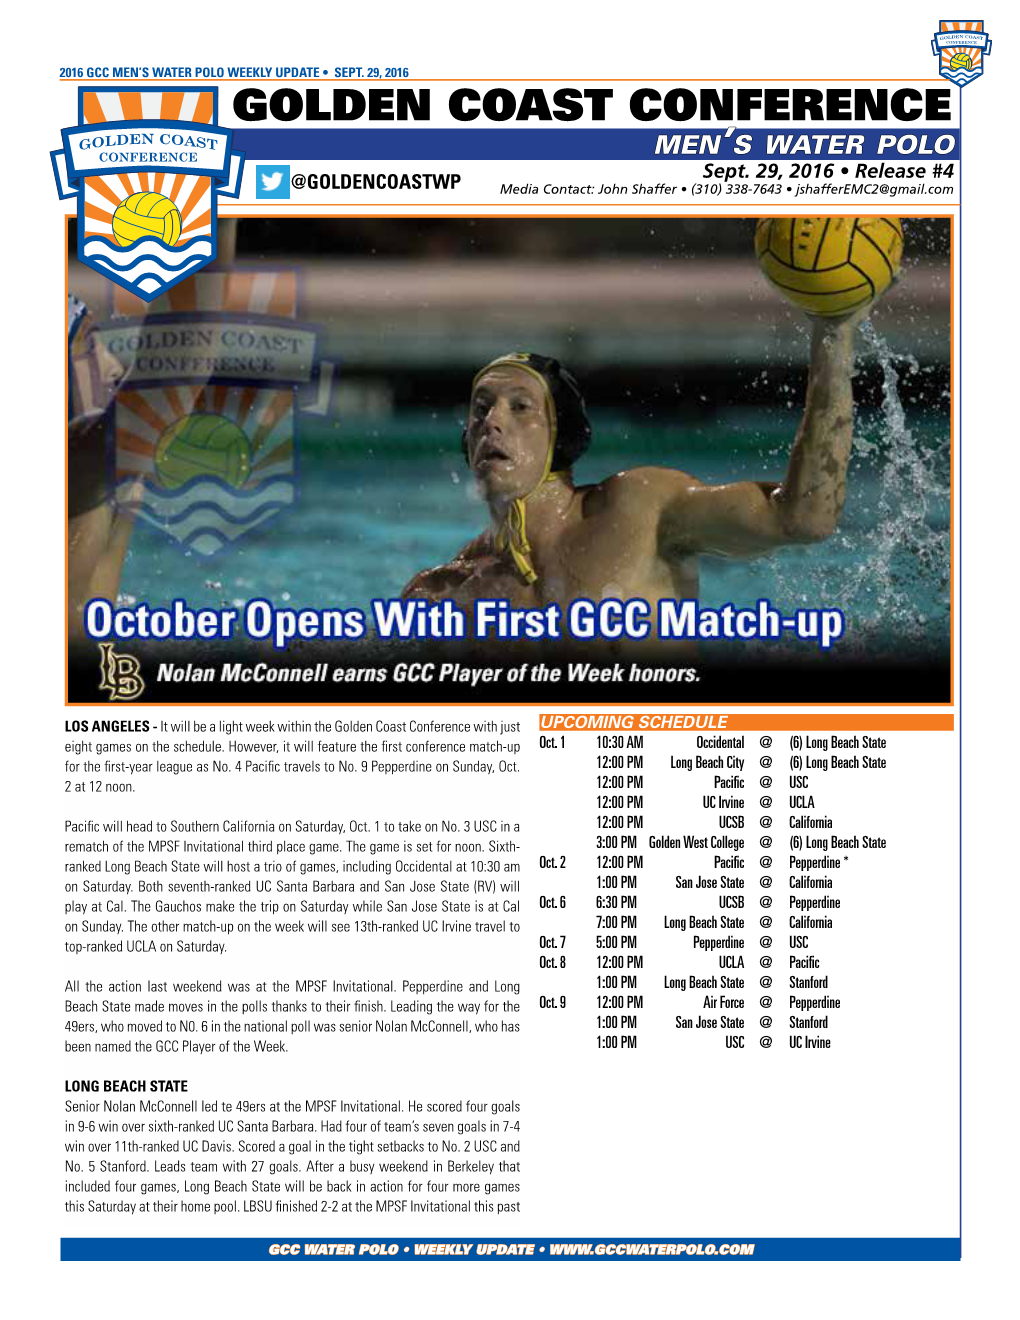 SEPT. 29, 2016 GOLDEN COAST CONFERENCE Men’S Water Polo Sept